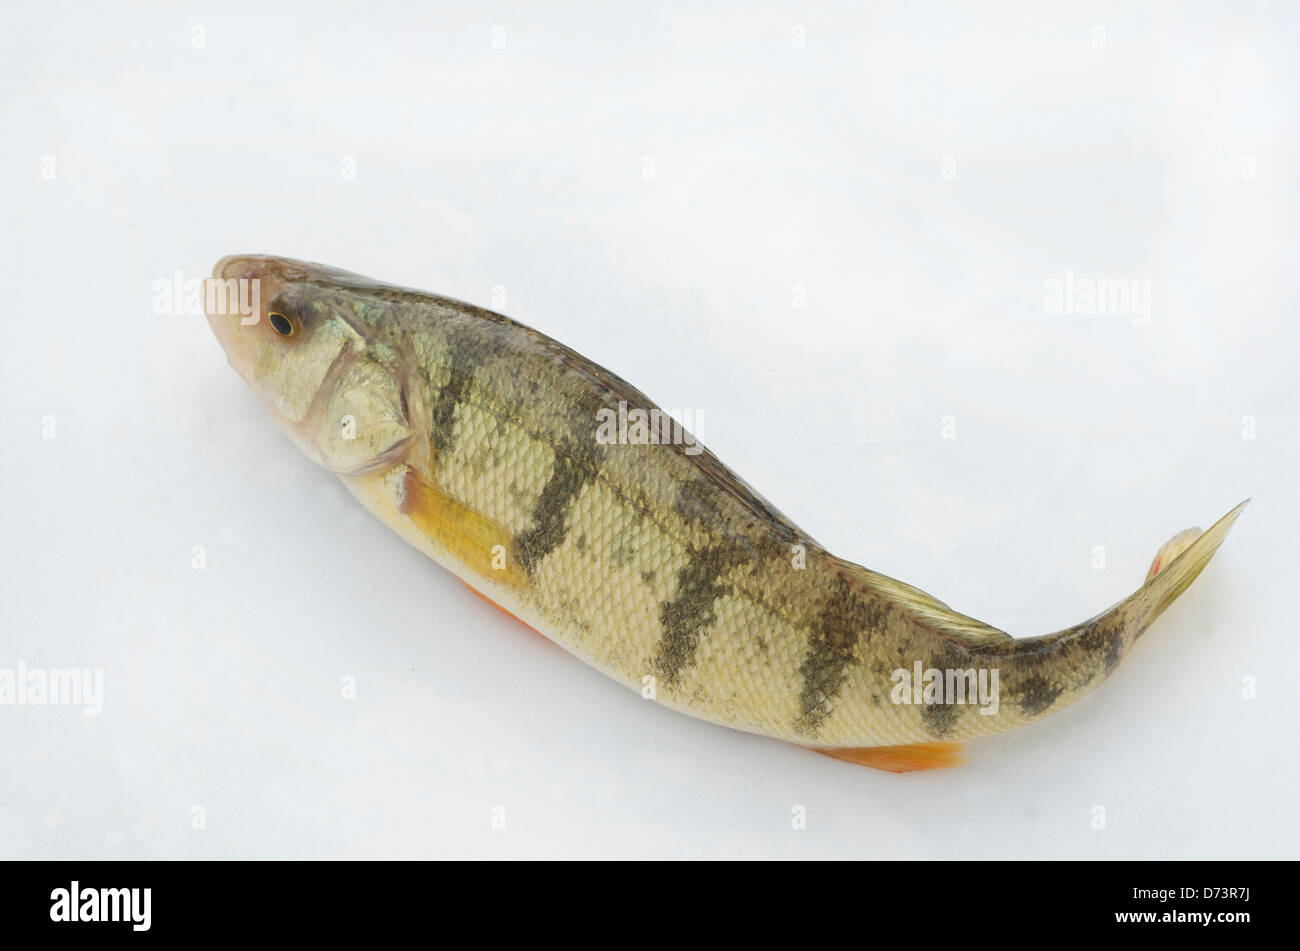 Living Perch on dry ground, 'a fish out of water' Stock Photo